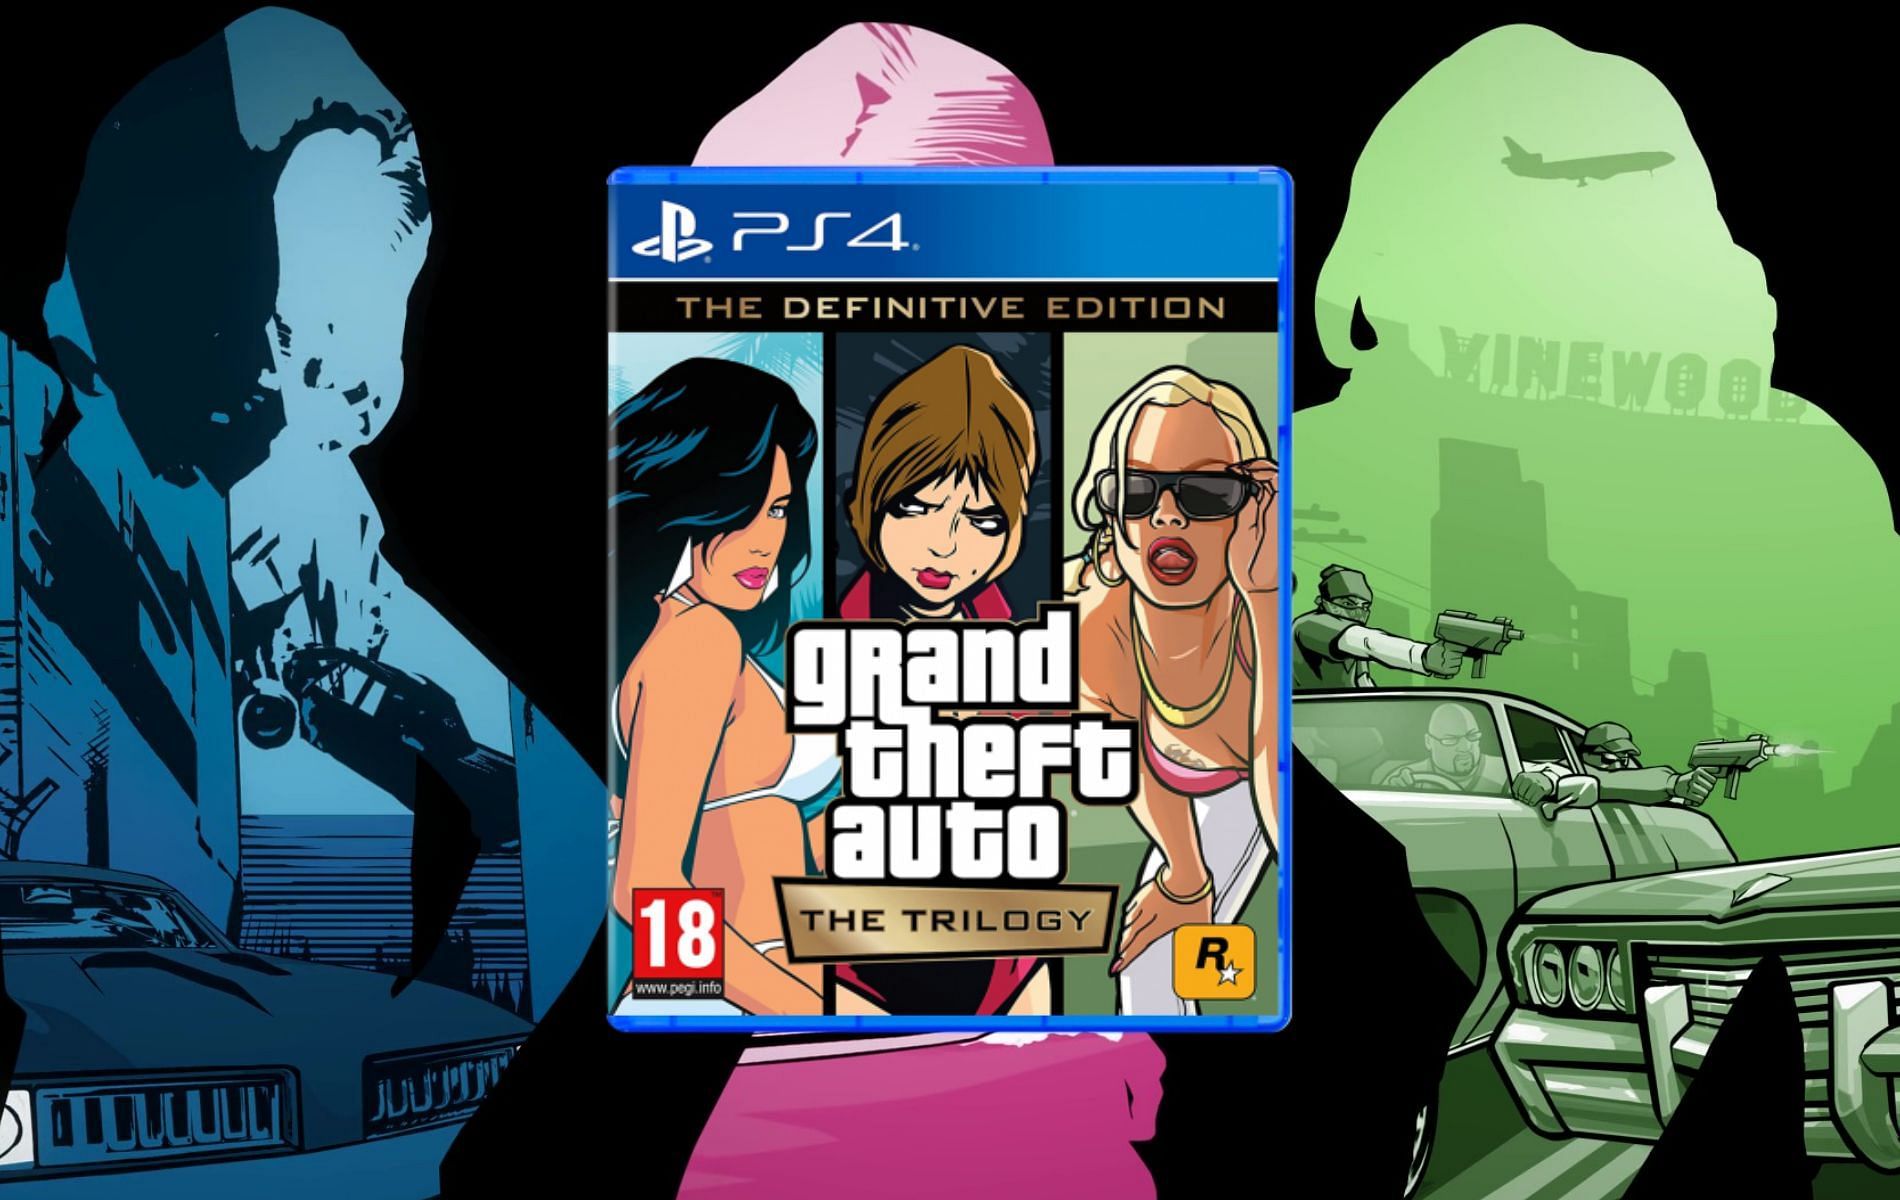 The physical version came out recently, but no new patch came along with it (Image via Rockstar Games)